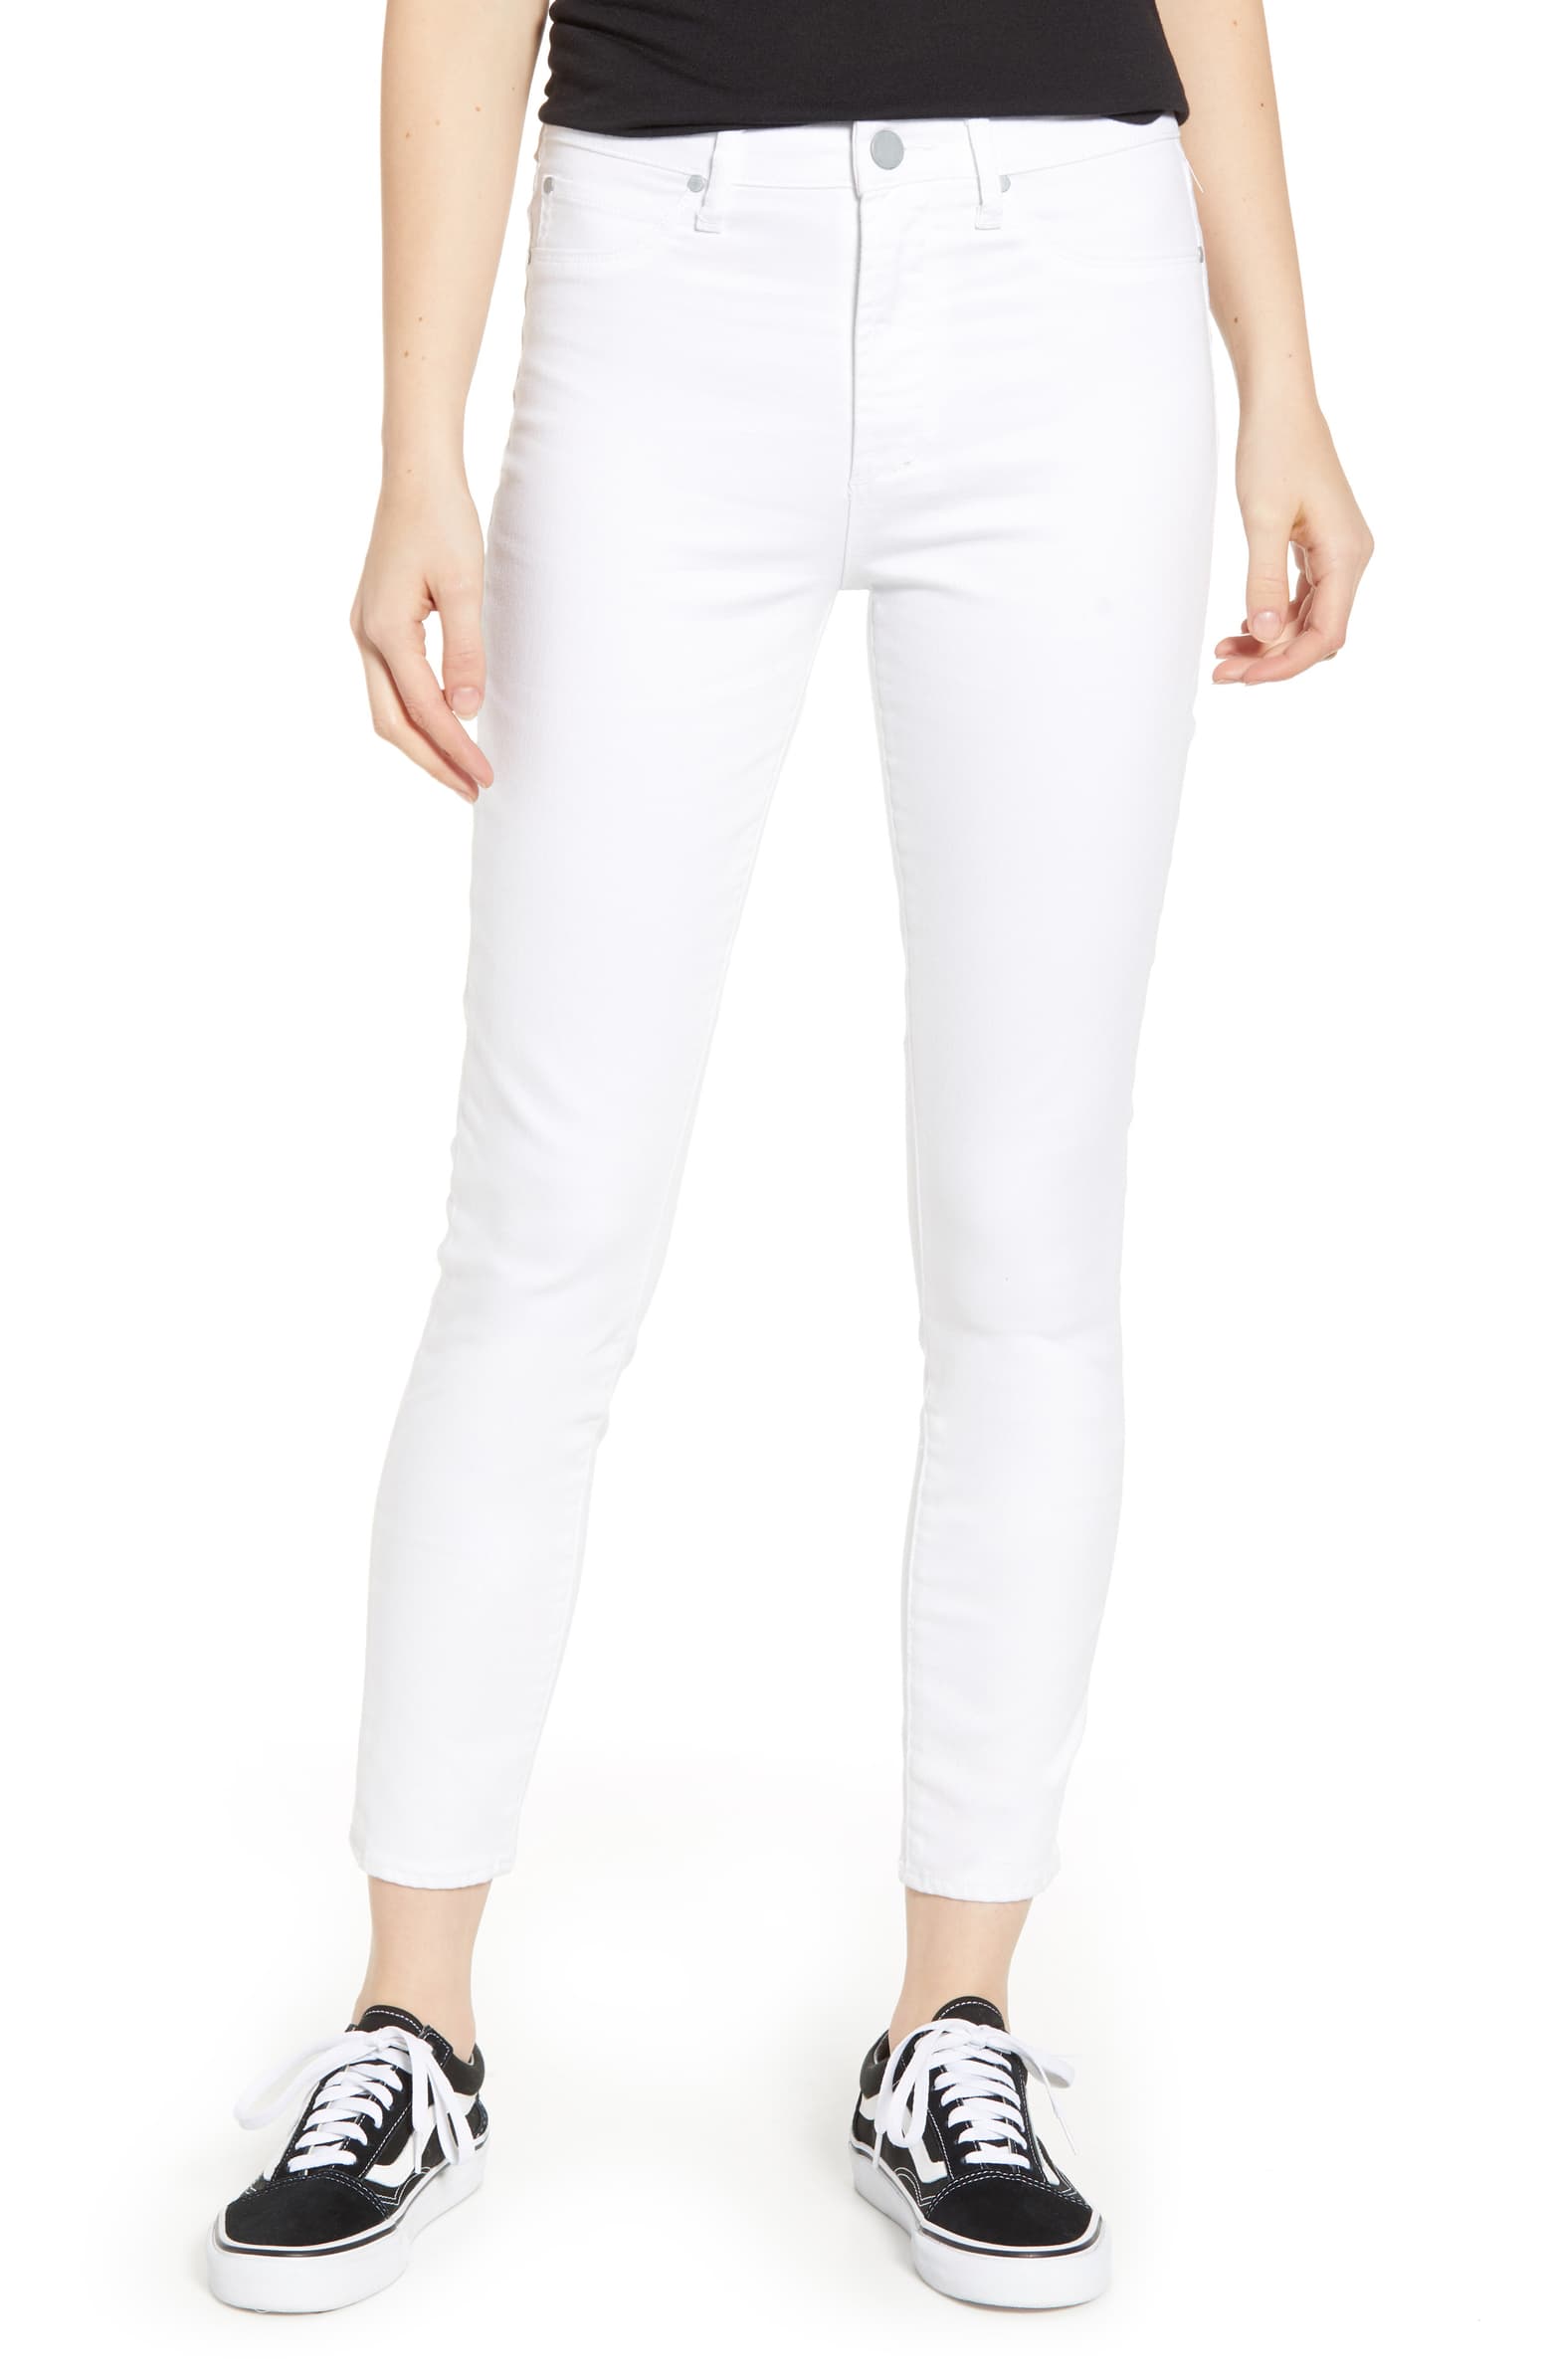 These $38 White Jeans Really Do Look Good On *Every* Woman - SHEfinds